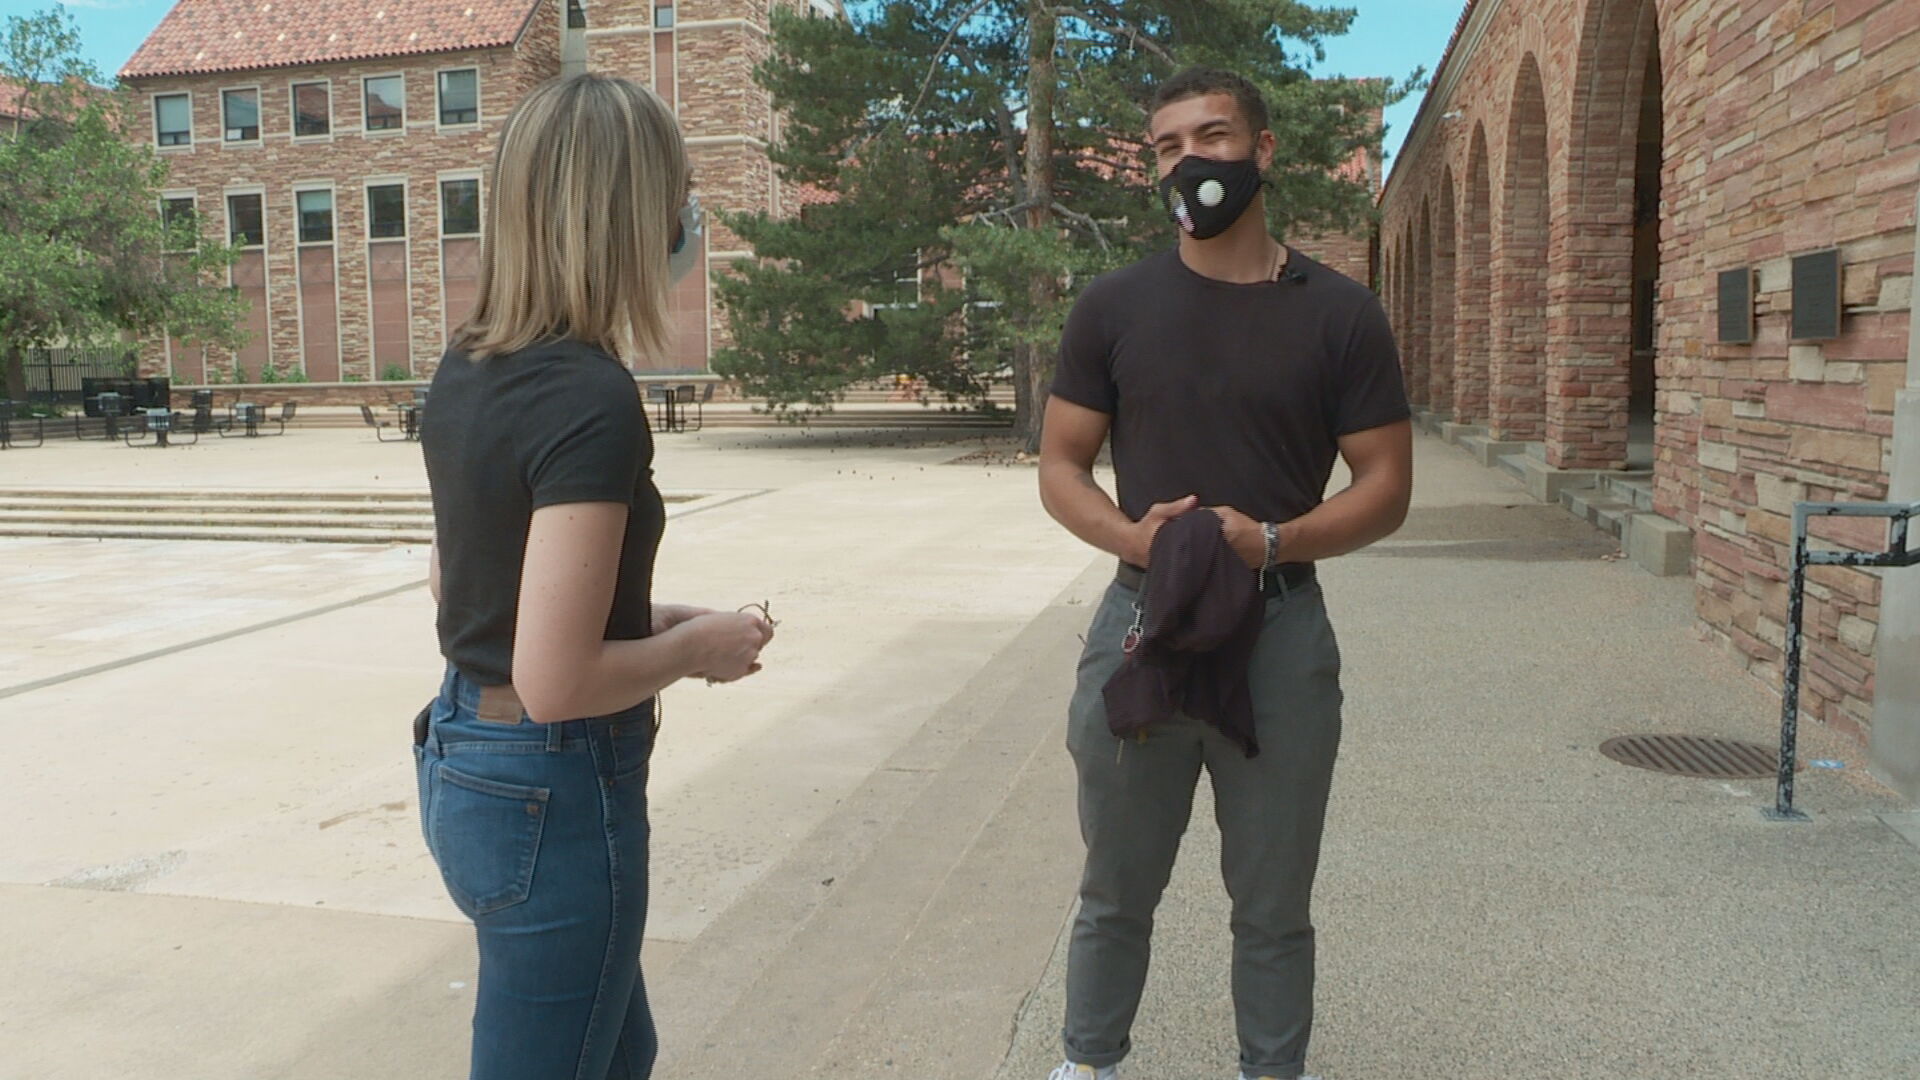 CBS4's Kati Weis interviews Max Bailey at the University of Colorado campus in Boulder.